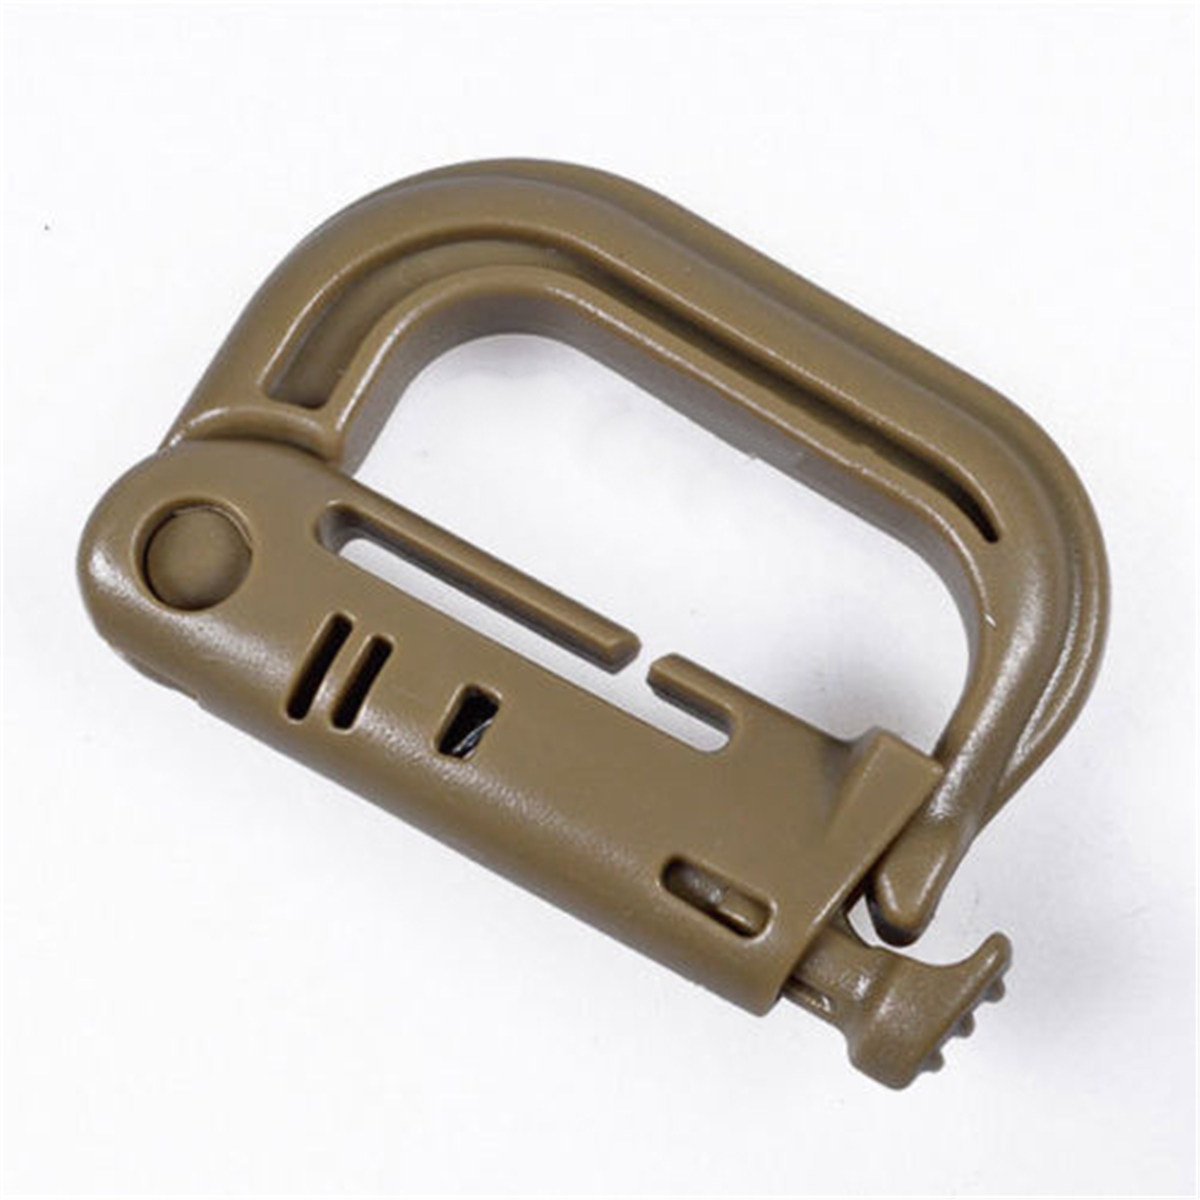 CAMTOA-Max-Load-90kg-D-Ring-Hook-Mountaineering-Buckle-Key-Chain-Outdoor-Climbing-Carabiner-Tactical-1885104-5